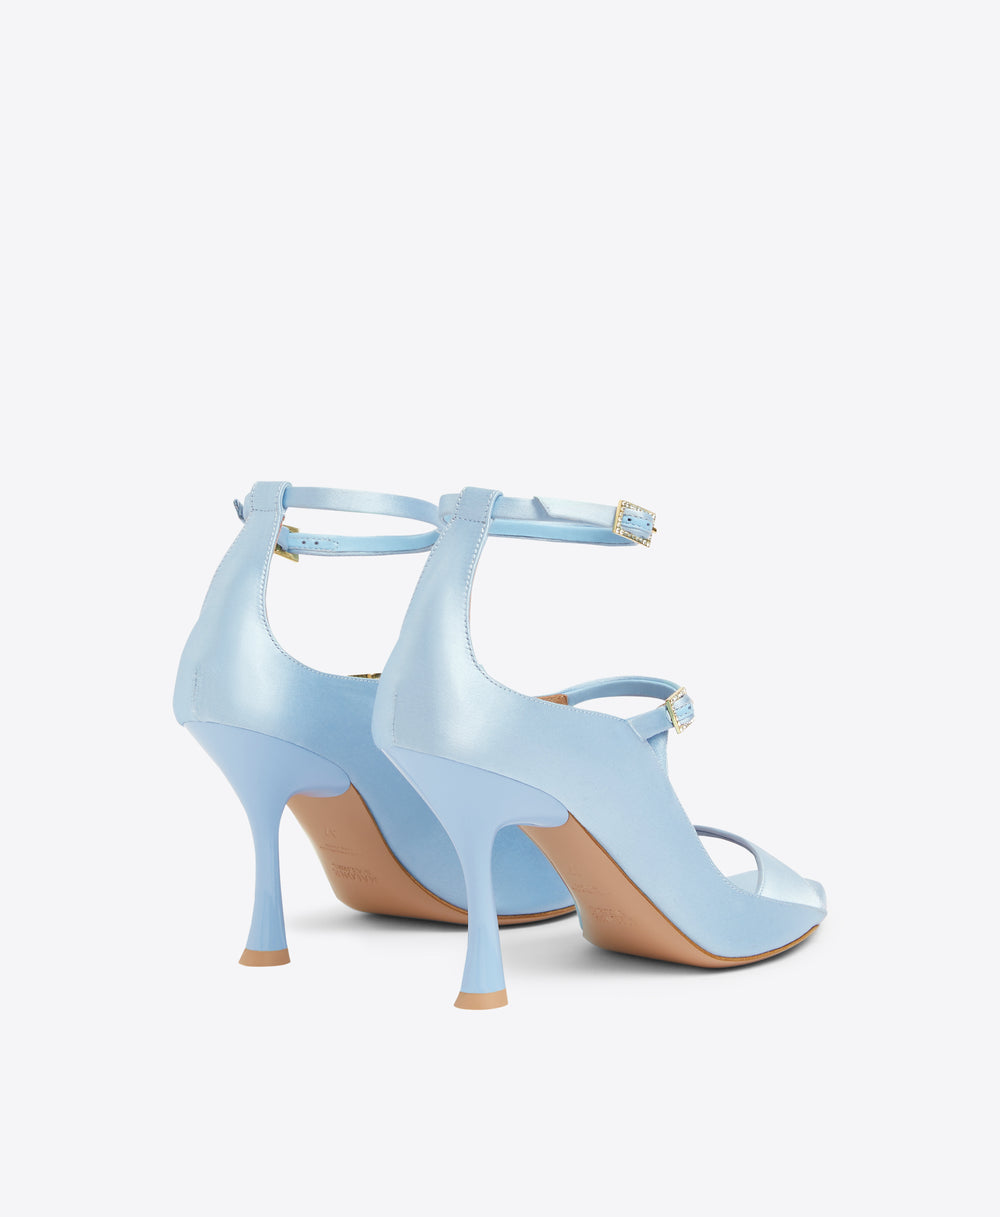 Riley 90 Baby Blue Satin Heeled Sandals Malone Souliers